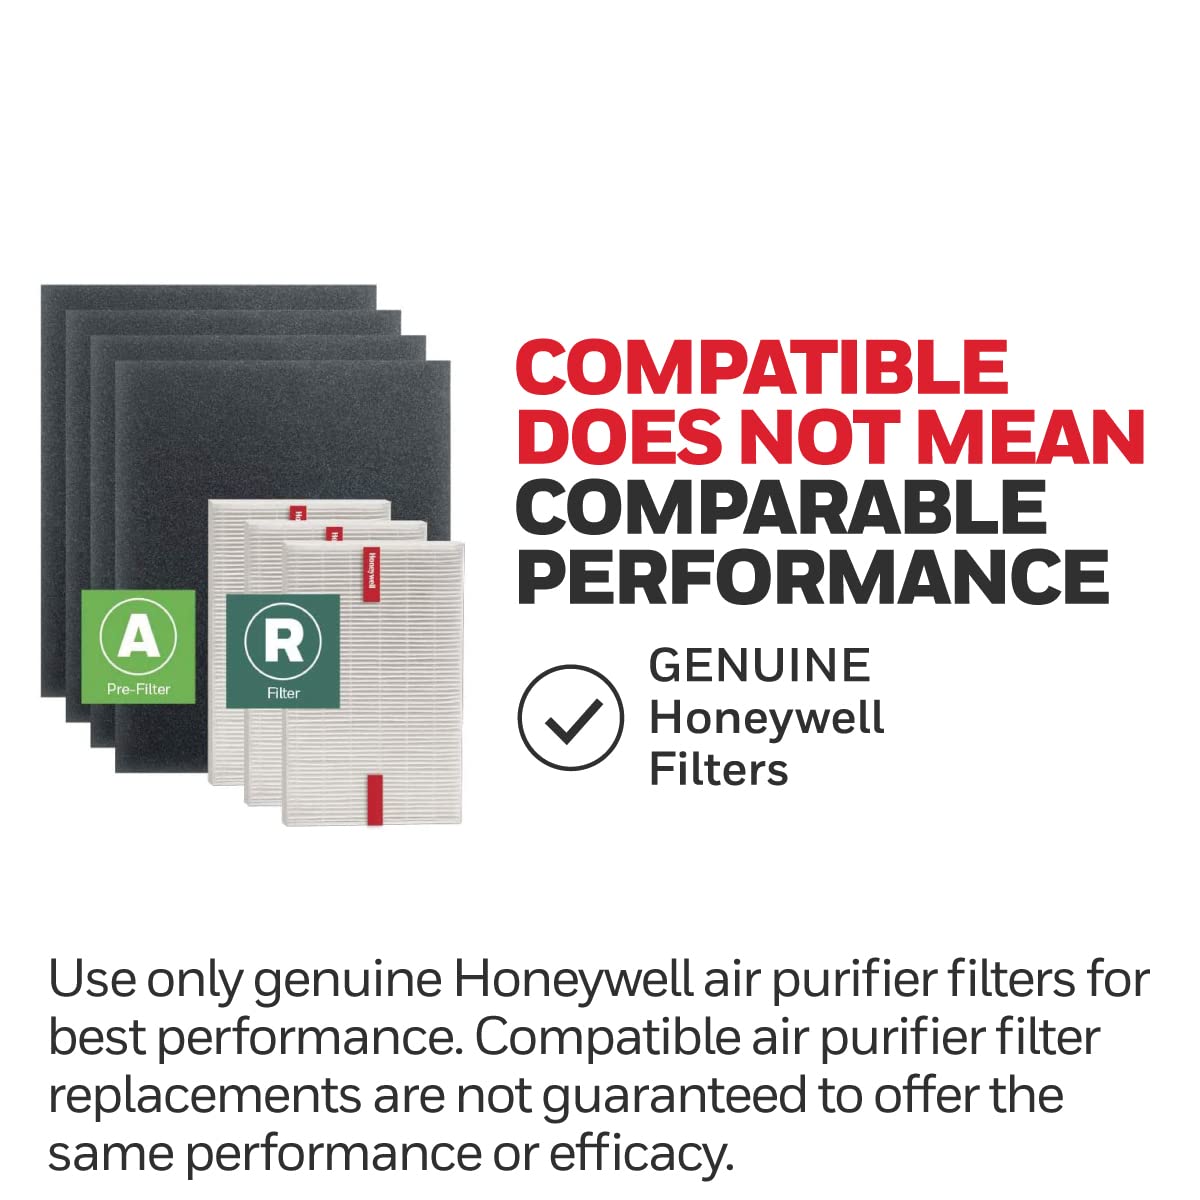 Honeywell HEPA Air Purifier Filter Kit – Includes 3 HEPA R Replacement Filters and 4 A Carbon Pre-Cut Pre-Filters – Airborne Allergen Air Filter Targets Wildfire/Smoke, Pollen, Pet Dander, and Dust